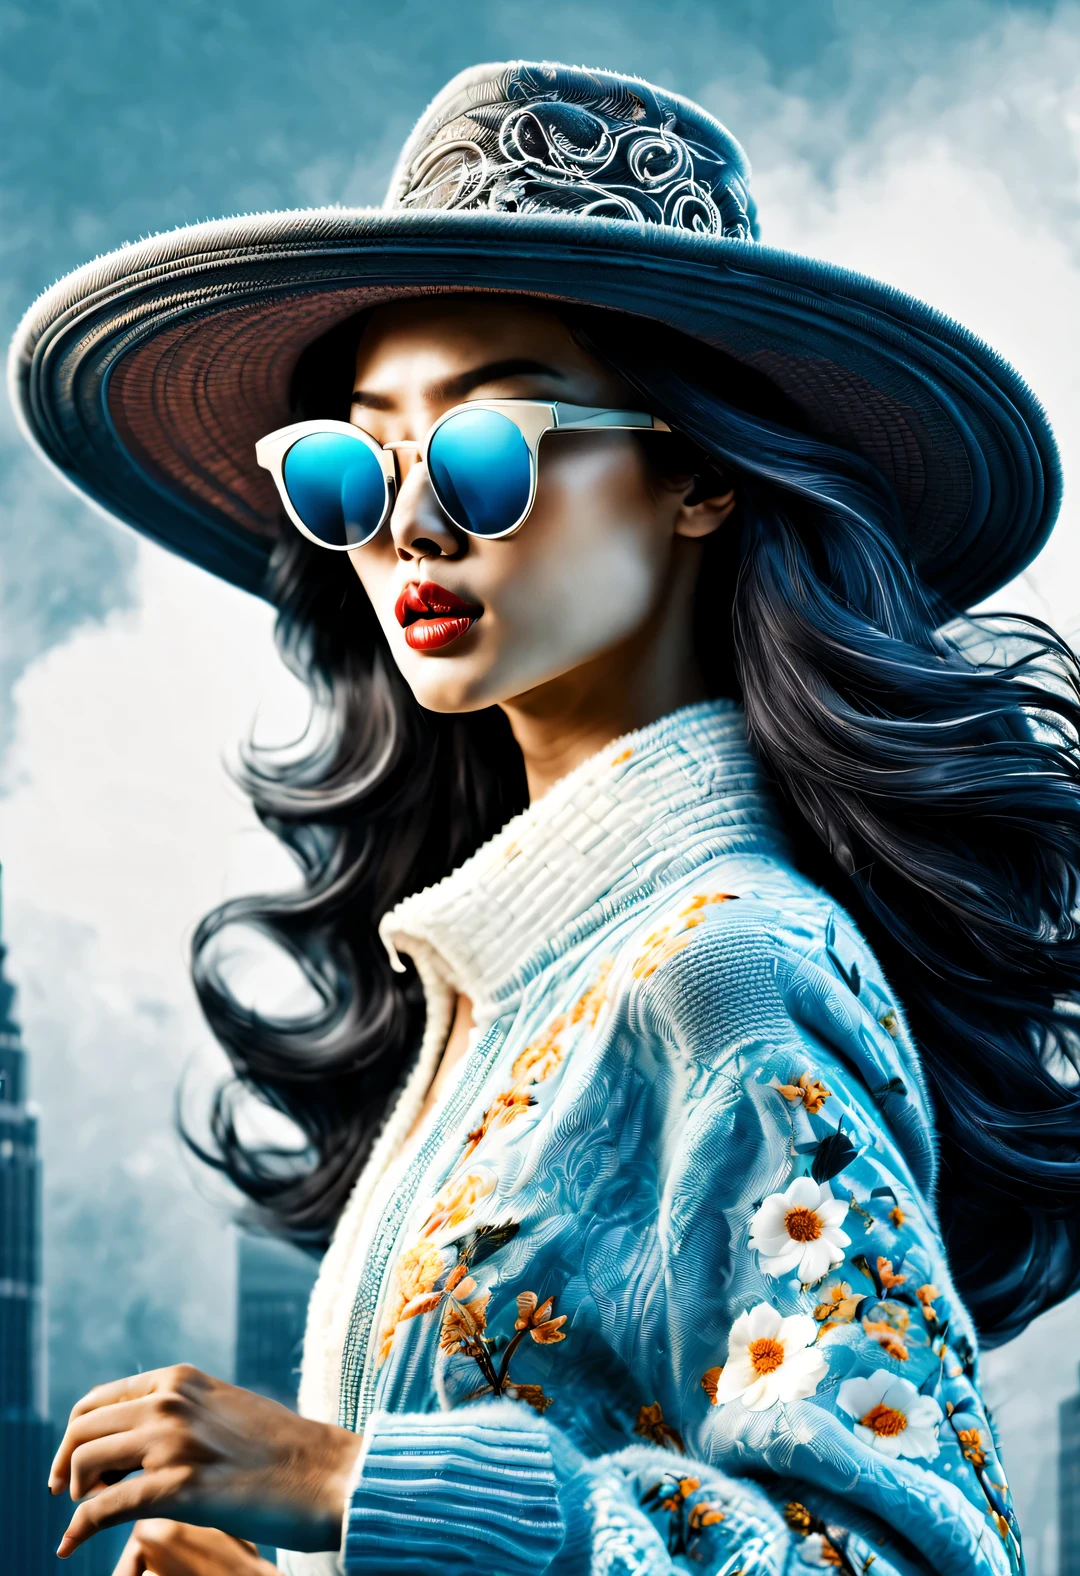 (Modern art dance simple poster design), (Half-length close-up), (Beautiful Chinese girl dancing in the air), (Wearing sunglasses and a hat: 1.2), Characterized by exquisite details and layering, The pastel tones of a light blue jacket and an off-white floral sweater blend together, Black and white plaid pants also have a sharp contrast, Create an elegant and modern urban style. (Briefcase flight: 0.85), Wear modern and stylish winter fashion, slim waist, high nose bridge, Head up posture, sad but beautiful, slender figure, Exquisite facial features, correct finger, swirling fog illustration, ink painting, black hair, Princess curly long hair, Proudly, Surrealism, contemporary art photography, action illustration, abstract expressionism, Pixar, depth of field, motion blur, backlight, Fall out, decline, Look up, Sony FE General Manager, ultra high definition, masterpiece, Accuracy, textured skin, Super details, high detail, high quality, Award-winning, best quality, grade, 16k, Photographed from a bottom-up angle,